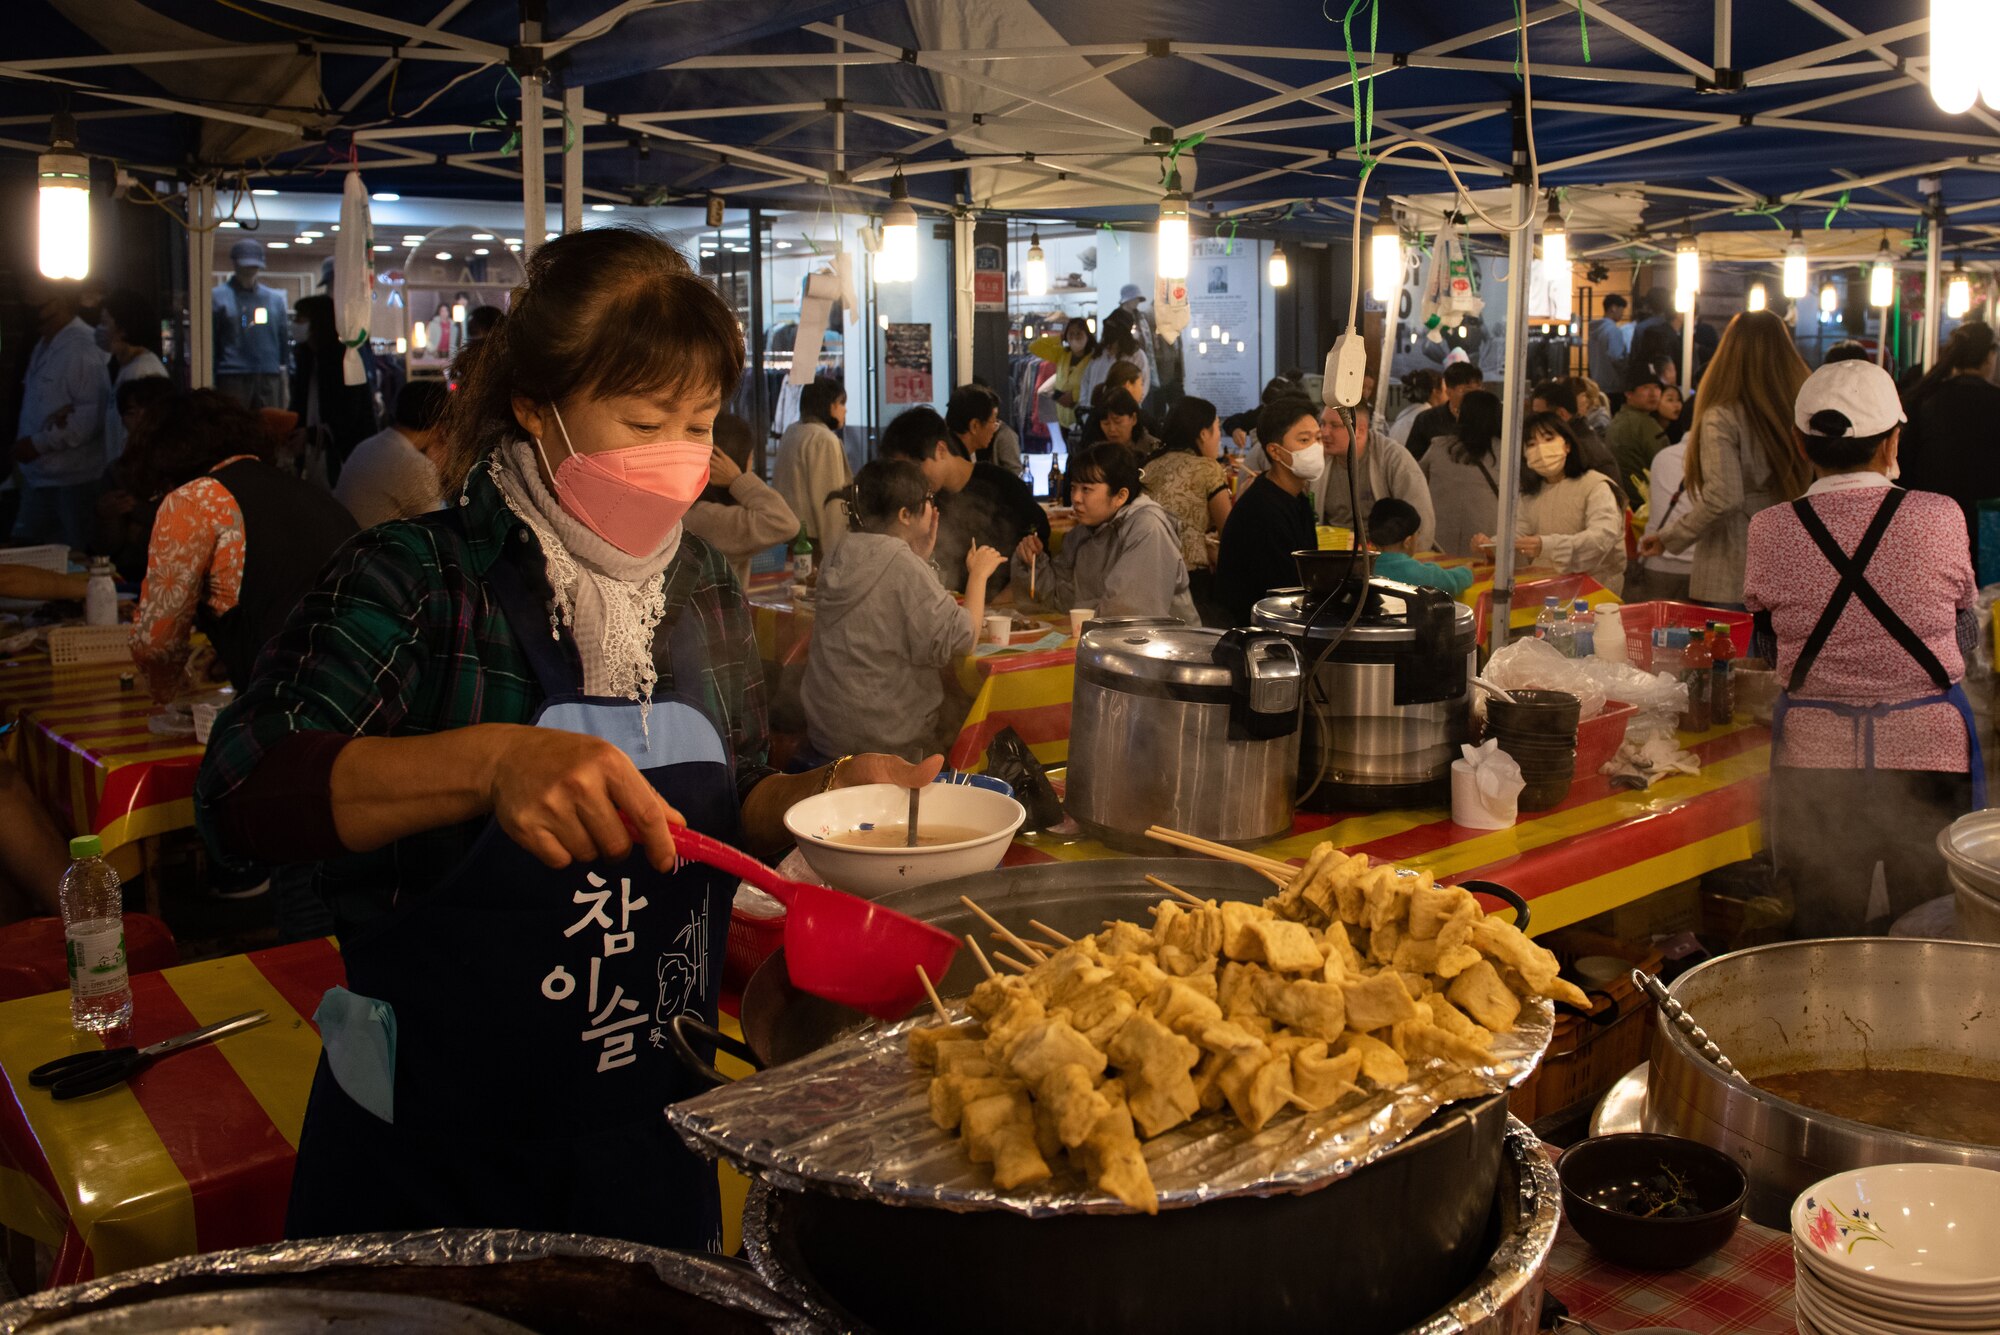 A vendor prepares food during the 19th Republic of Korea and the United States Cultural Festival, in front of Osan Air Base, Republic of Korea, Oct. 8, 2022.